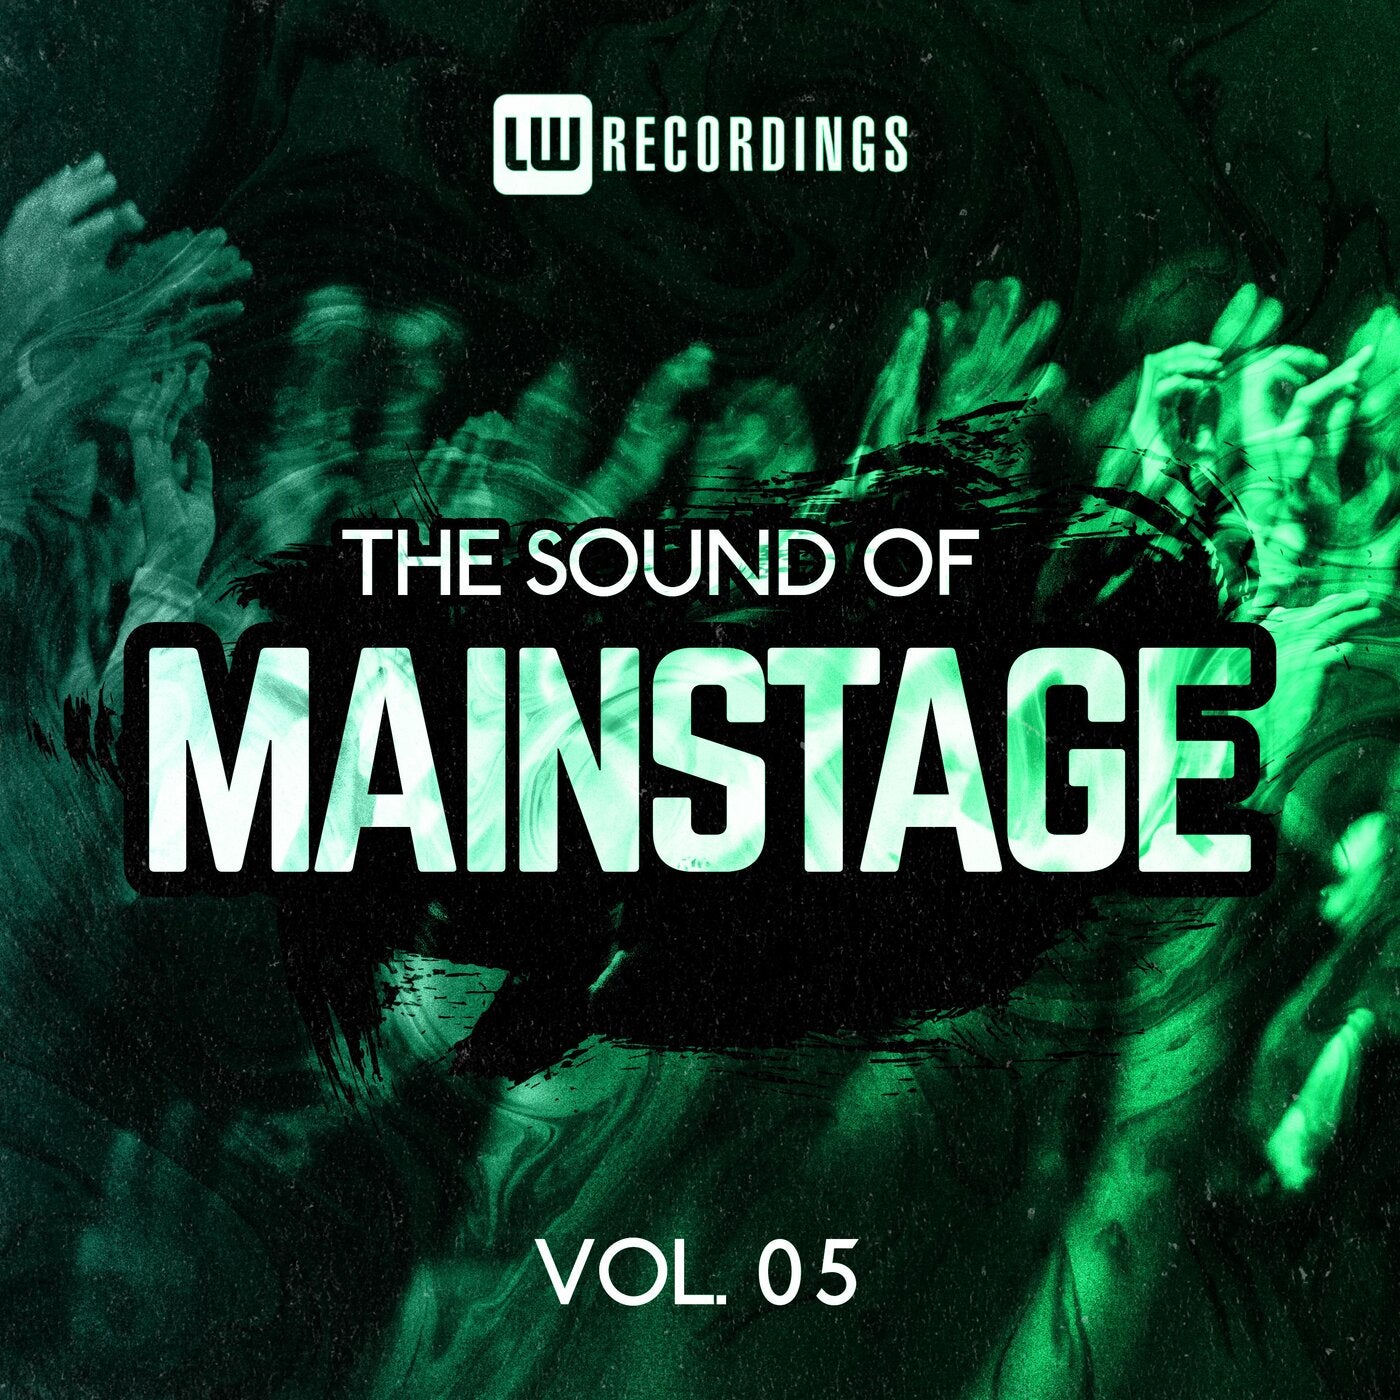 The Sound Of Mainstage, Vol. 05